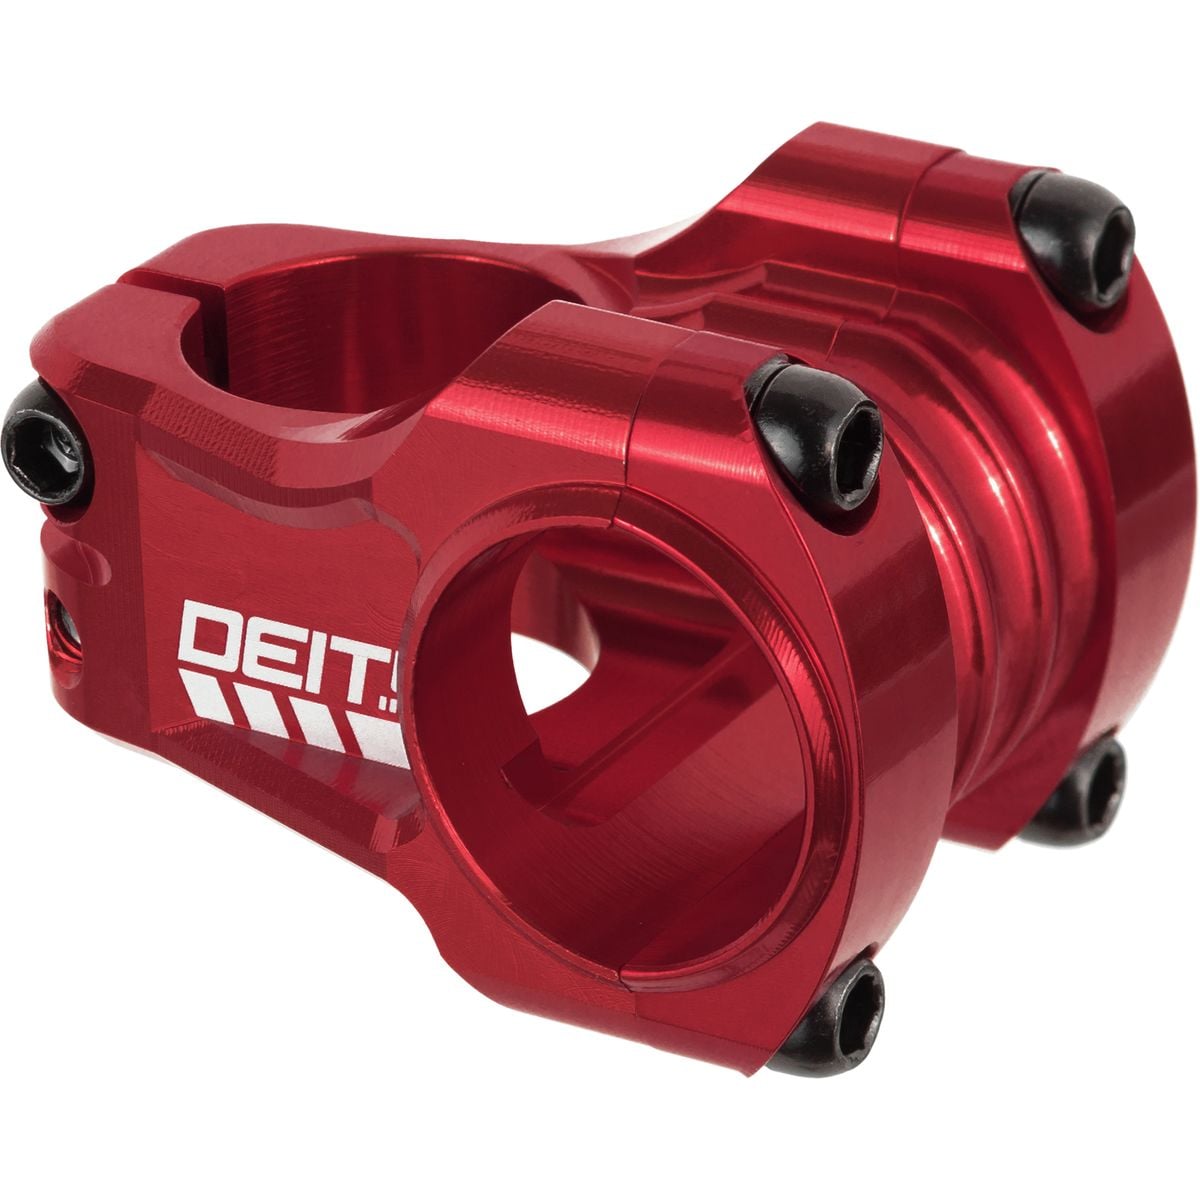 Deity Components Copperhead Stem Red, 35MM